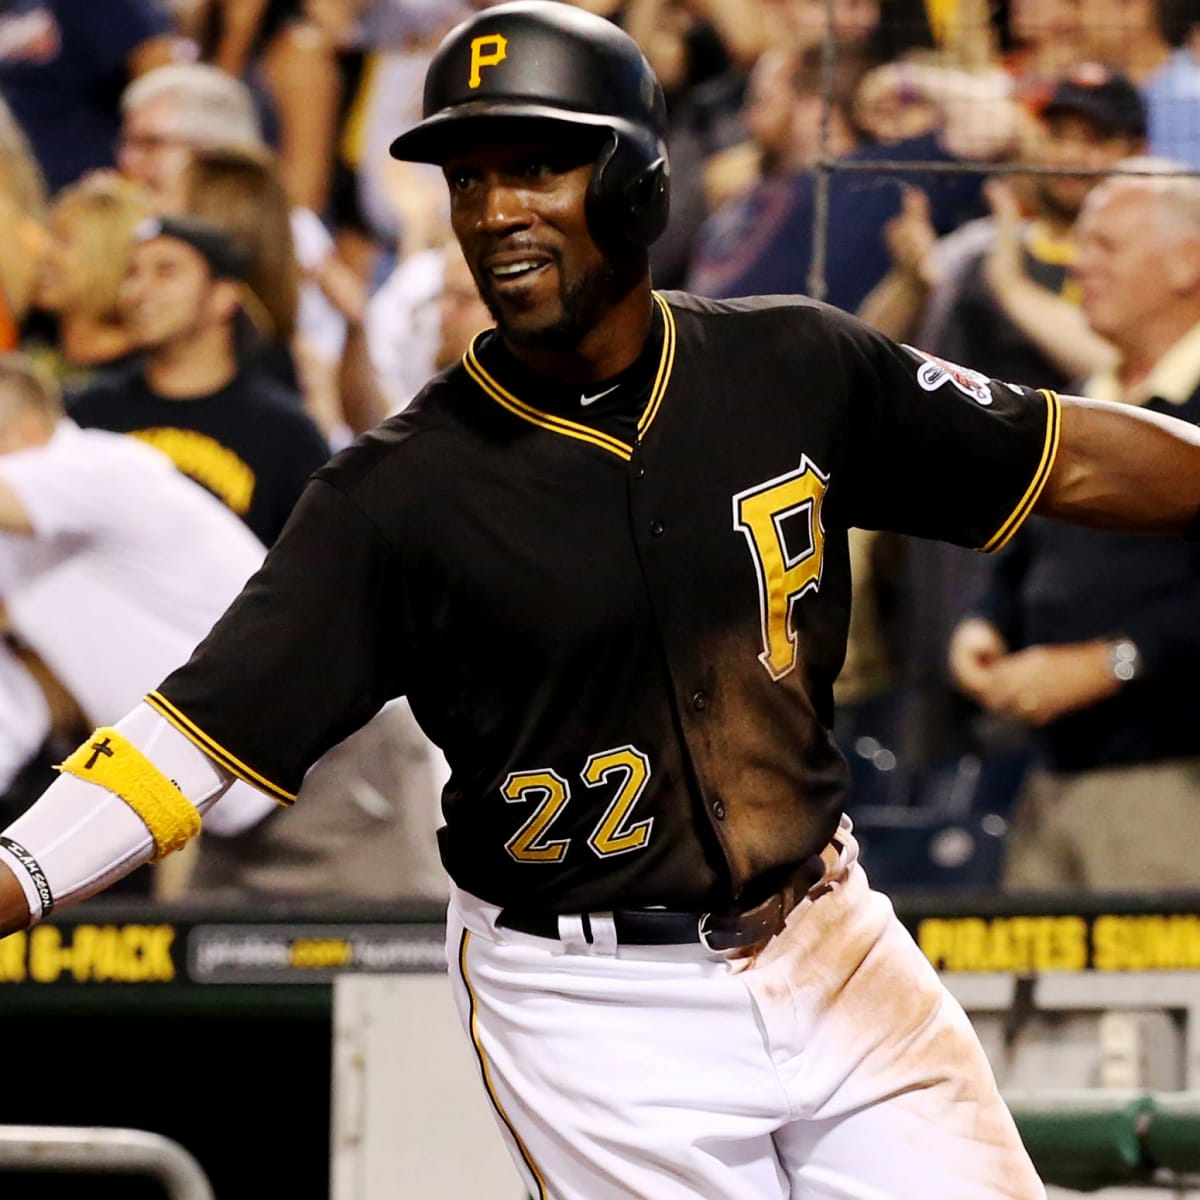 MLB free agency: Andrew McCutchen signs with Pirates - Sports Illustrated